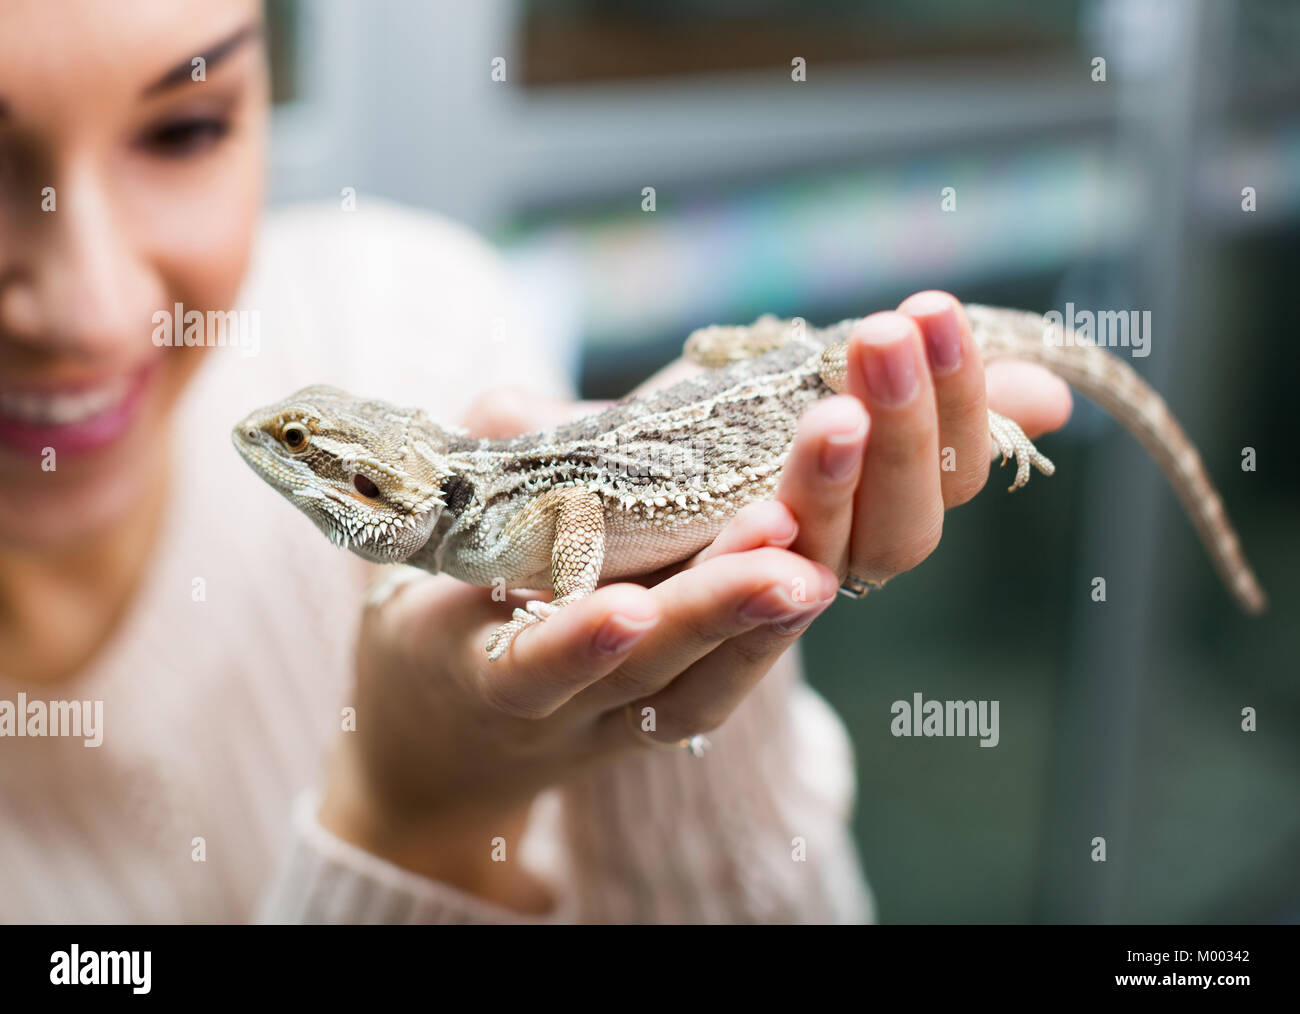 Portrait of happy woman holding a lizard in hands Stock Photo - Alamy